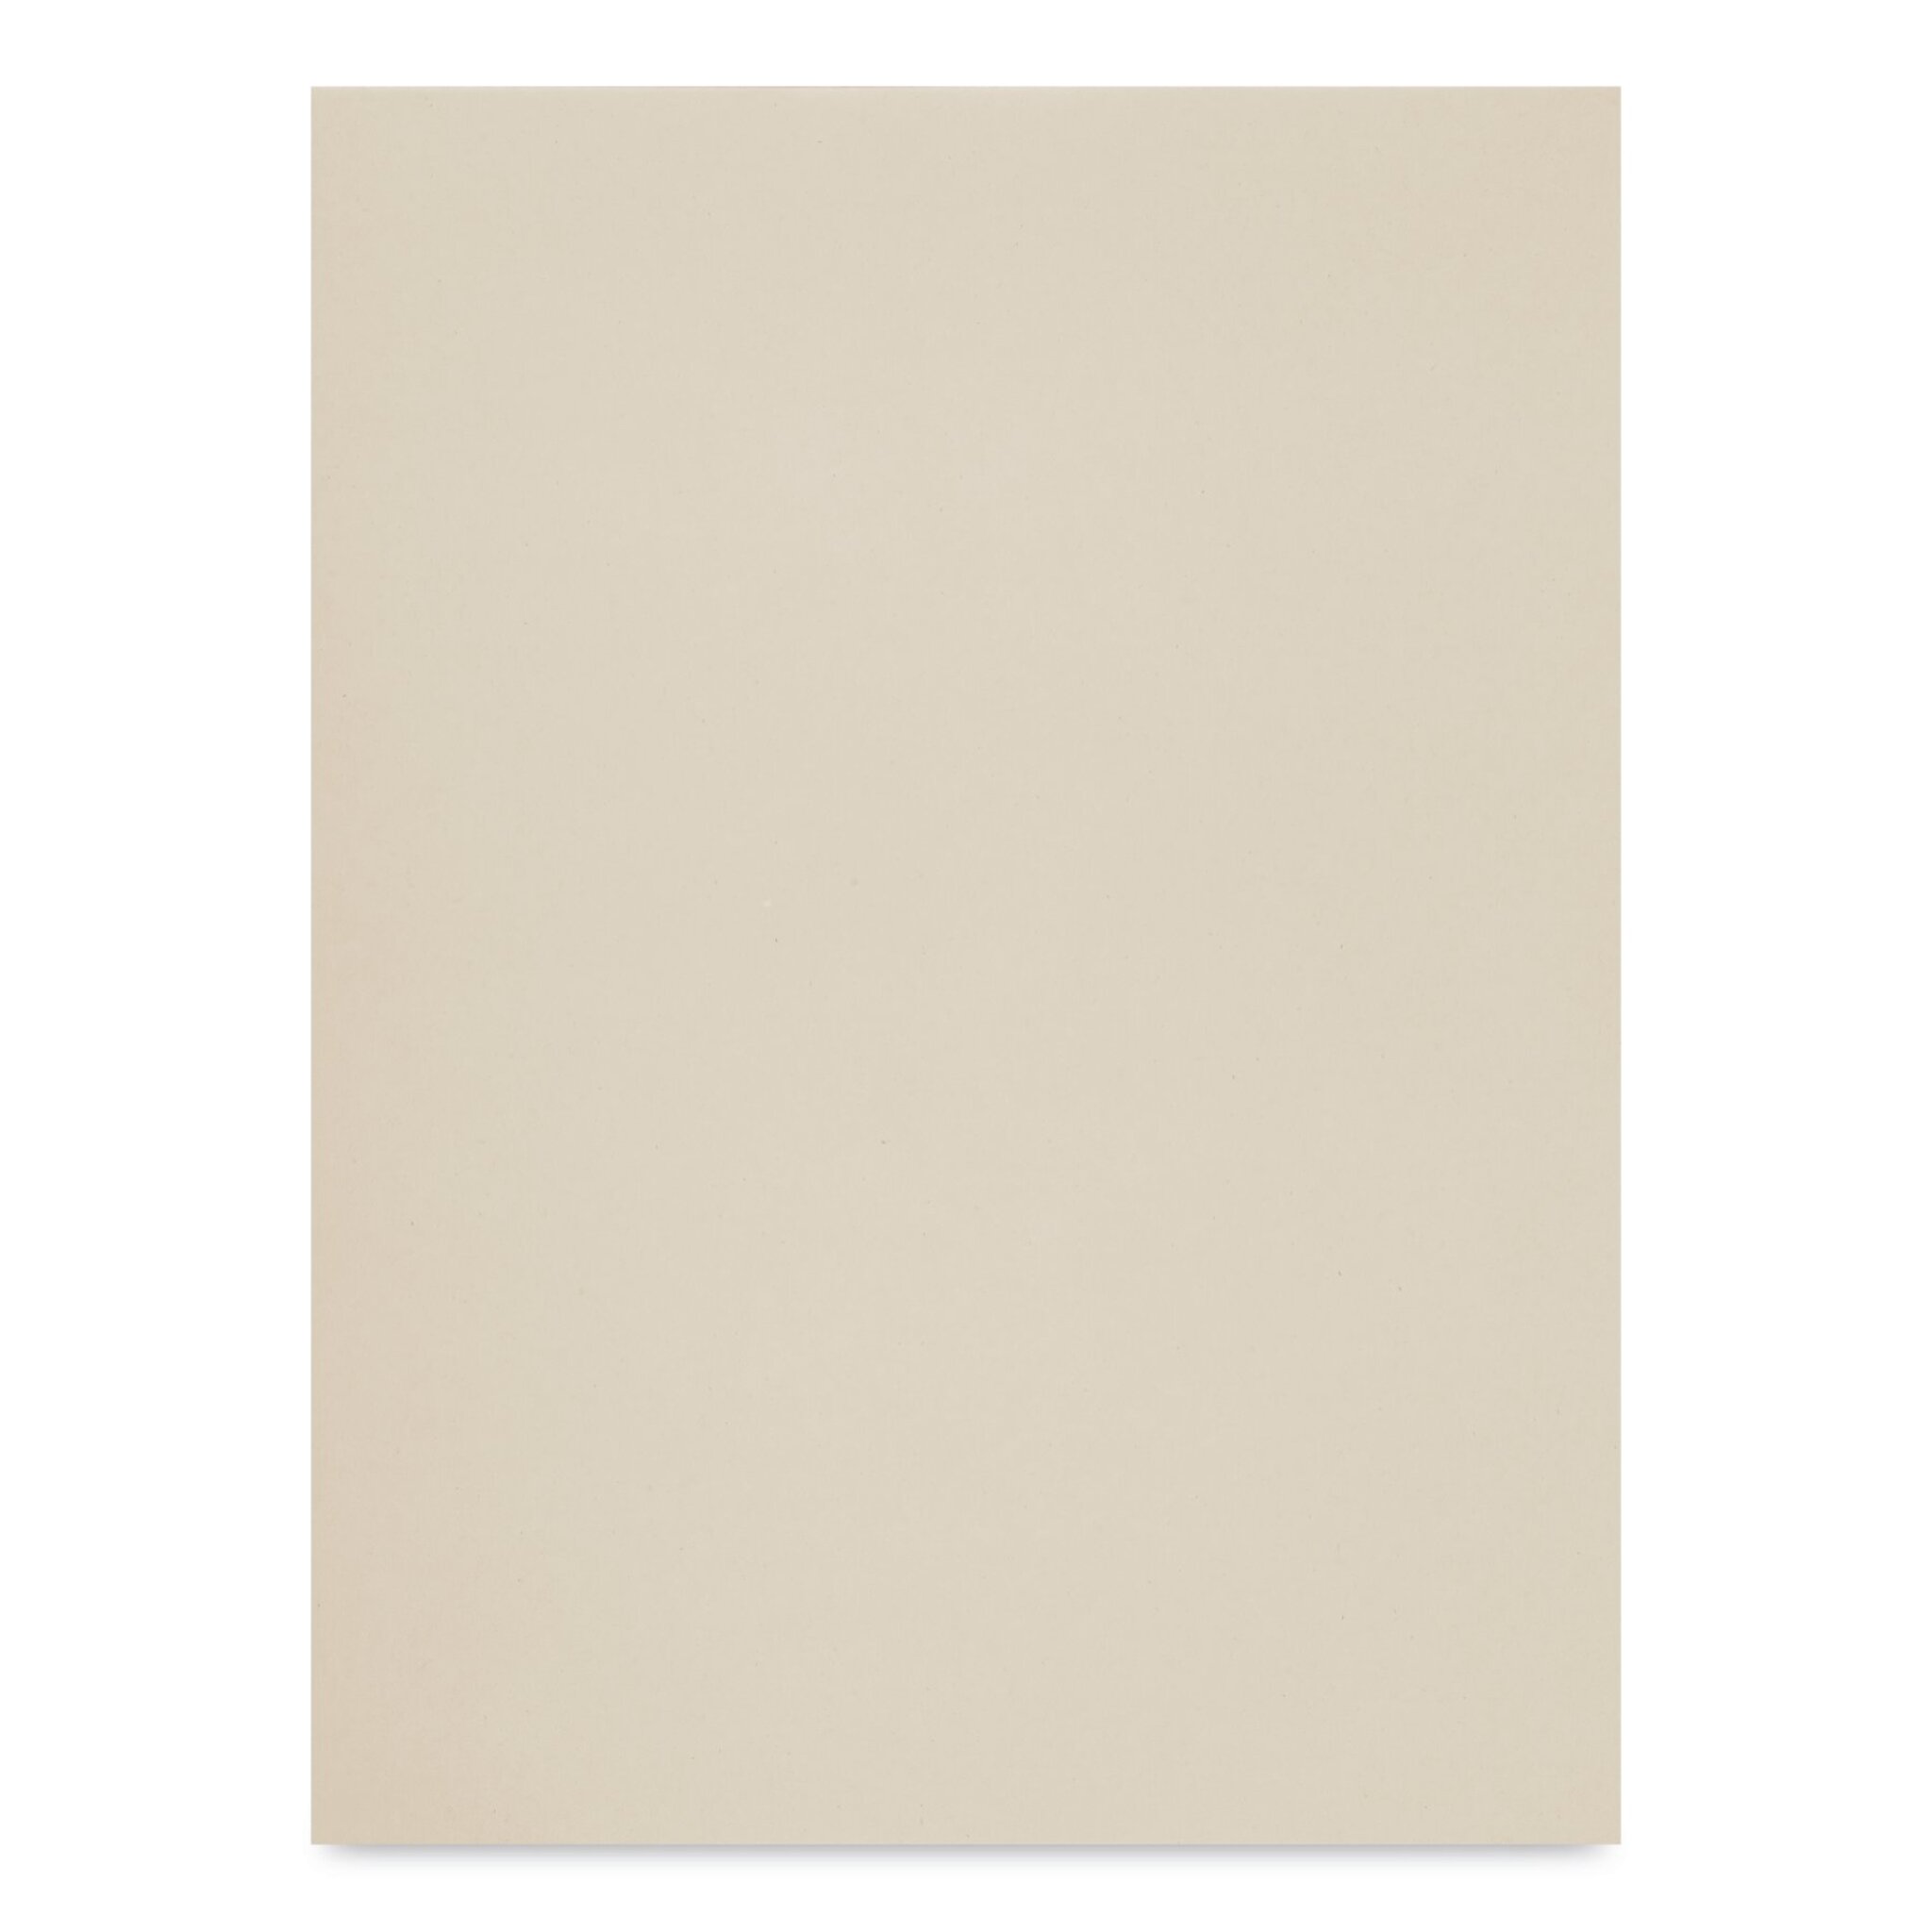  Clairefontaine Pastelmat Glued Pad - Palette No. 2 - (7 x 9 1/2  Inches) 18 x 24 cm - 360g - 12 Sheets - Sienna, White, Brown, Charcoal Grey